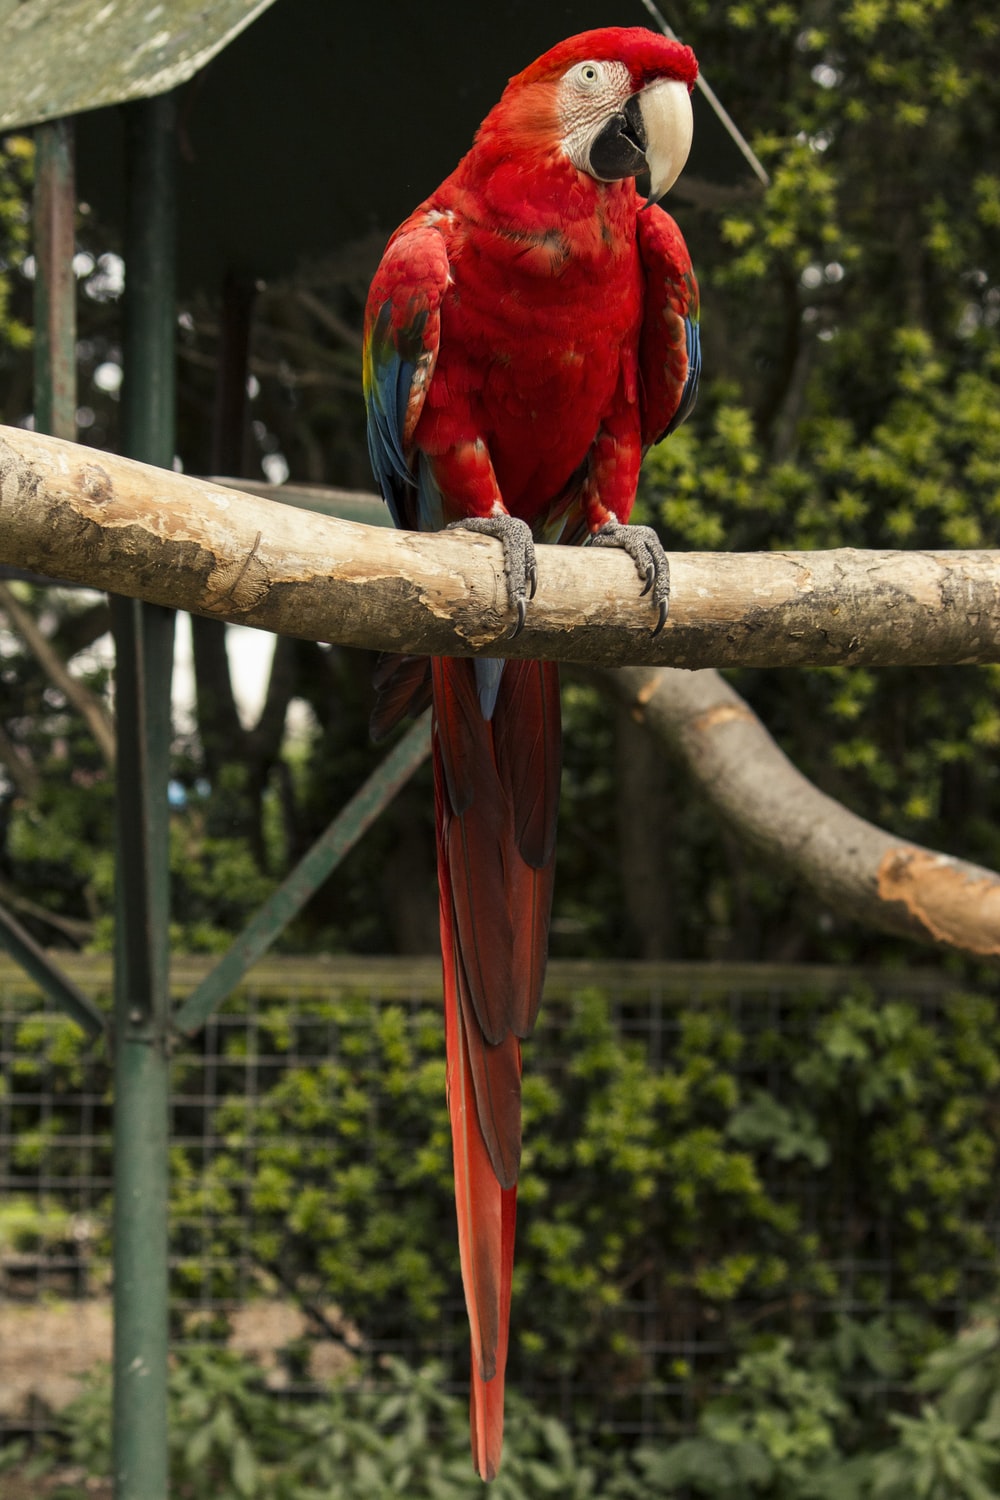 Red Parrot Picture. Download Free Image